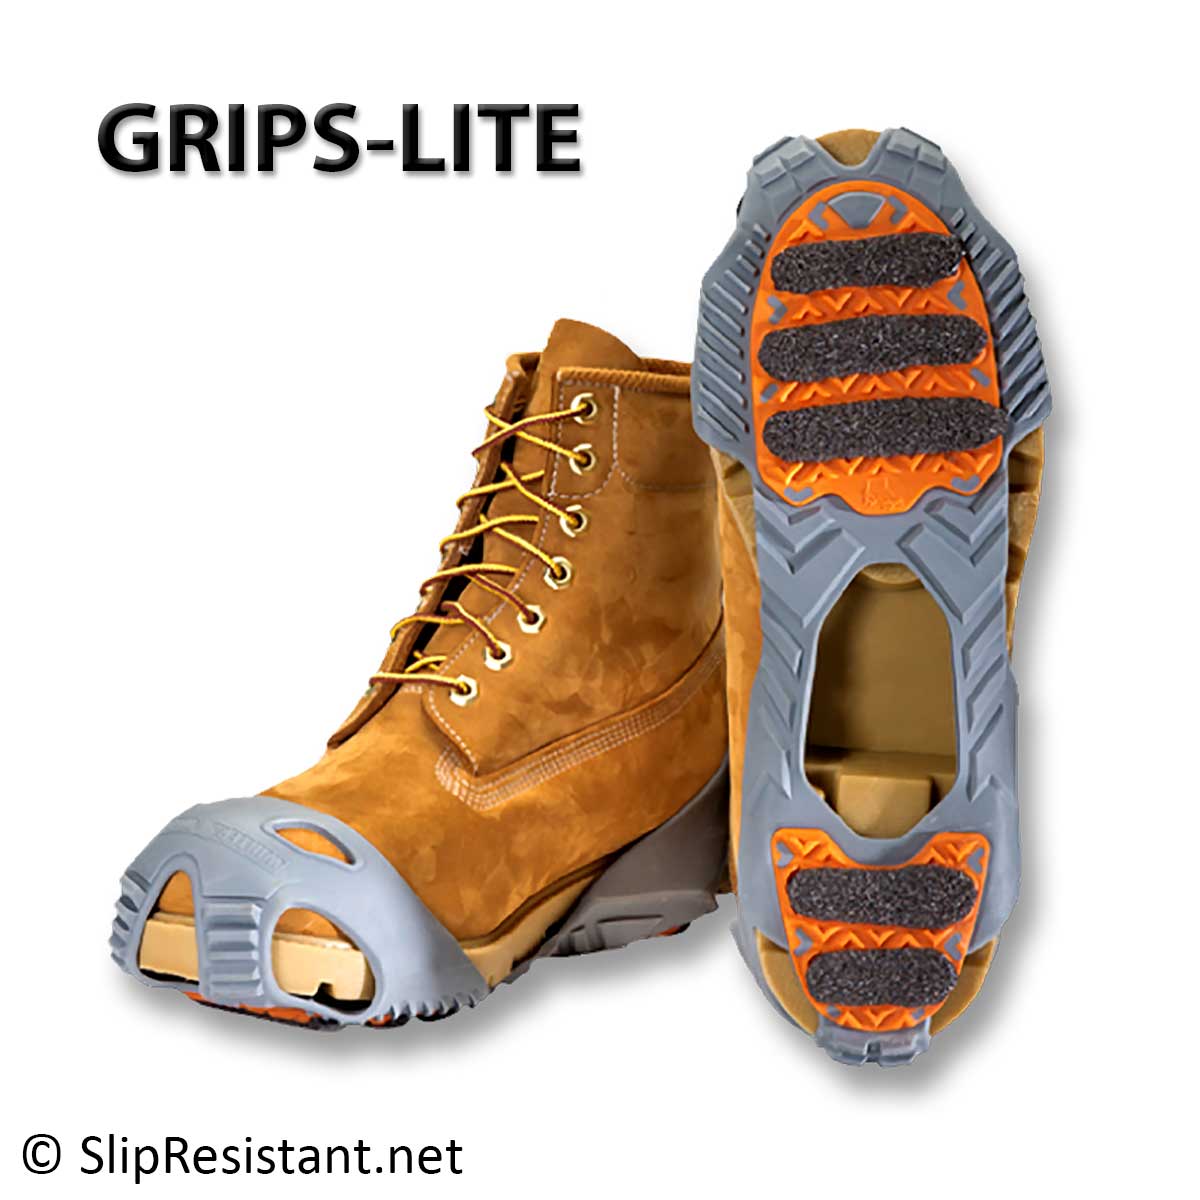 GRIPS-LITE Shoe Traction Device